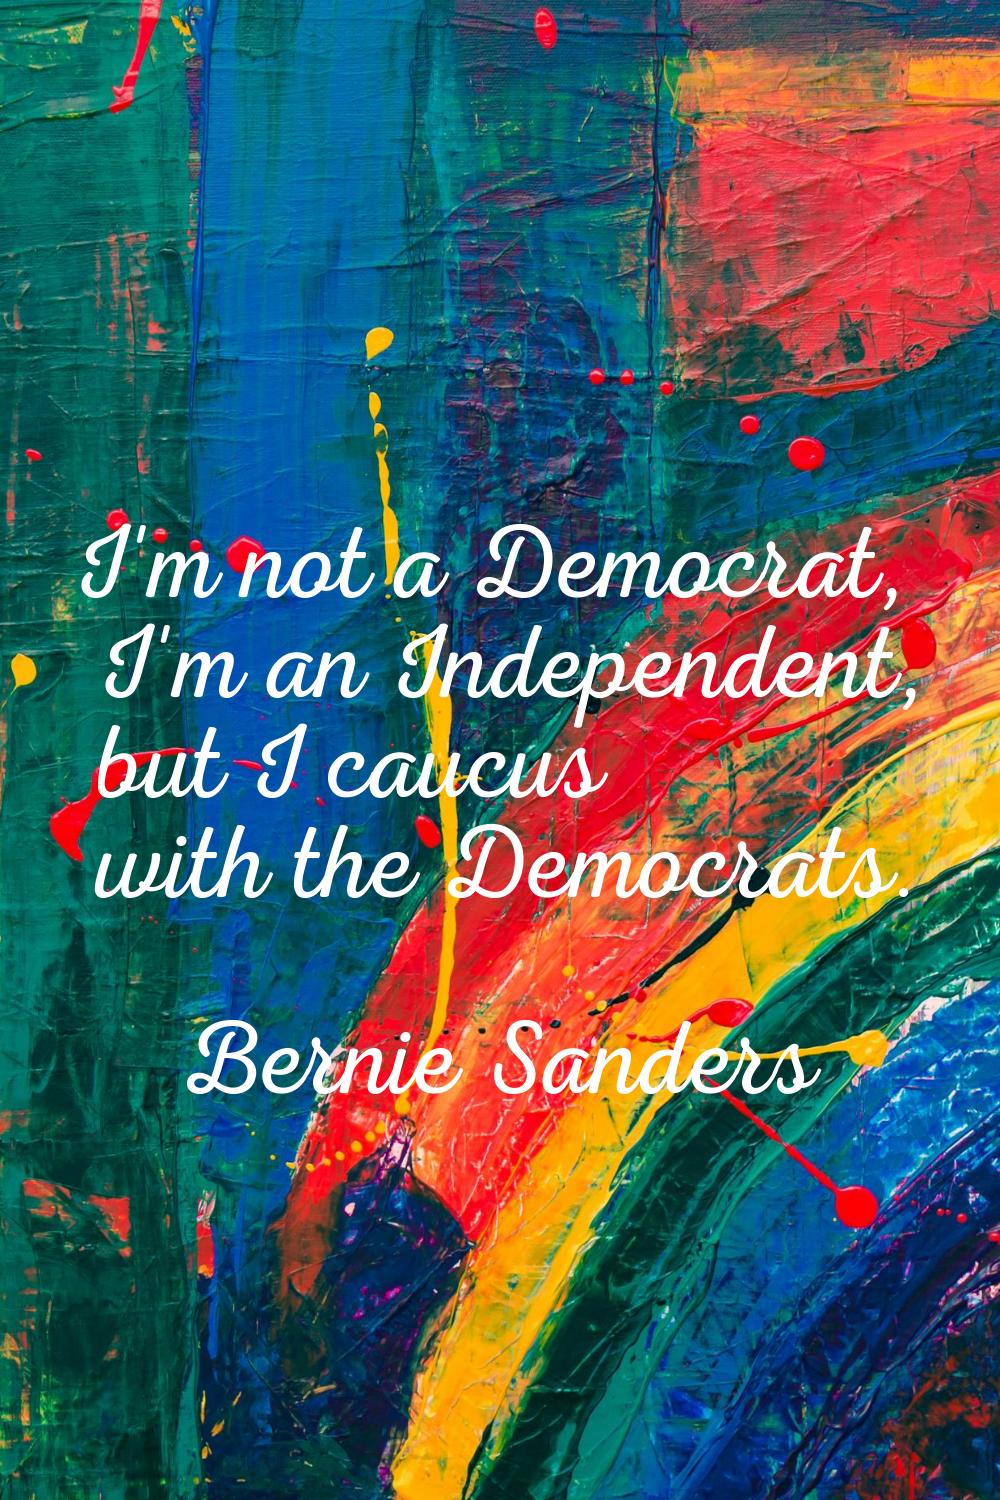 I'm not a Democrat, I'm an Independent, but I caucus with the Democrats.